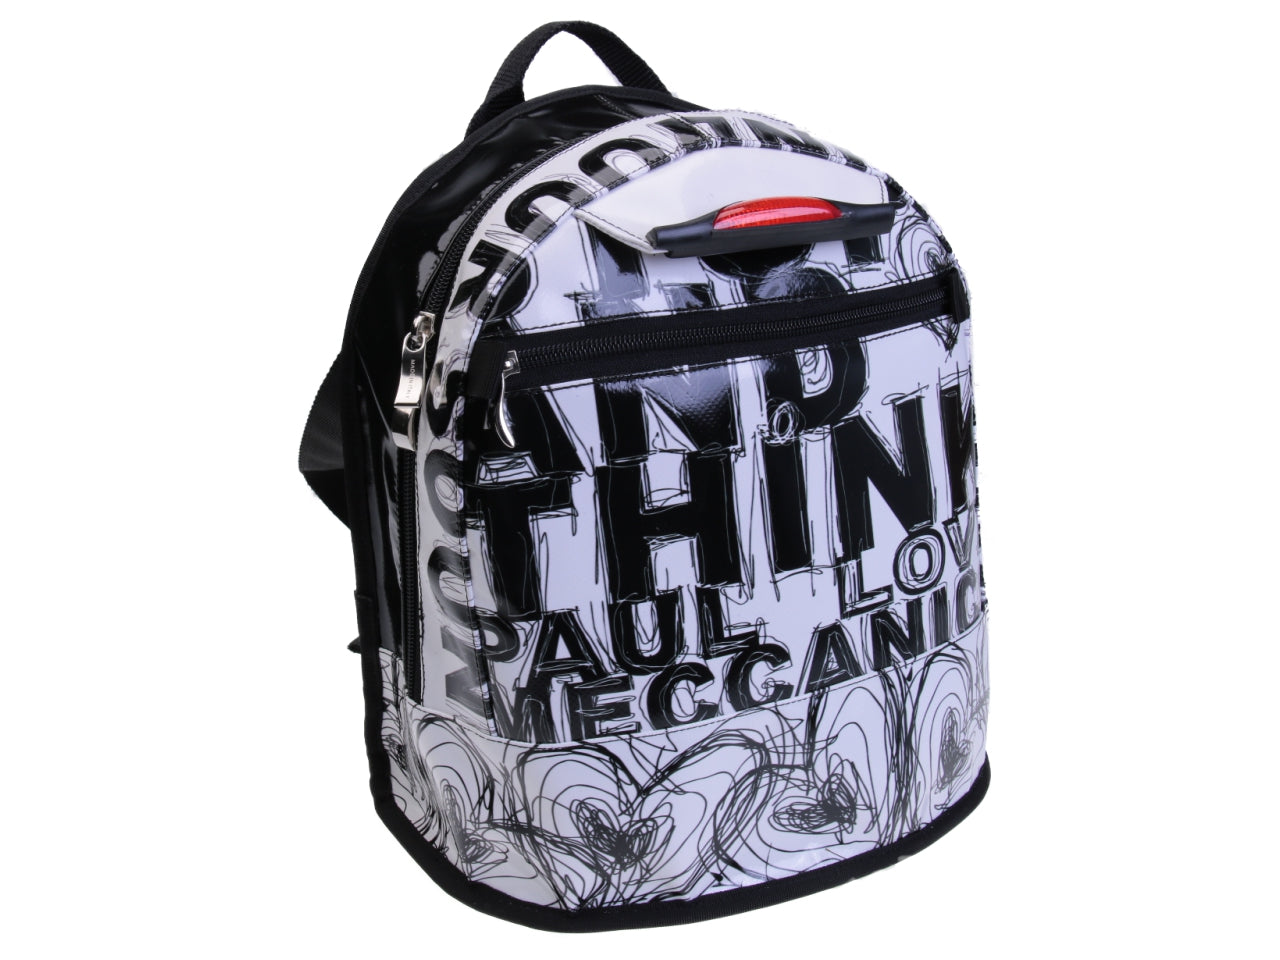 BLACK AND WHITE BACKPACK "STOP AND THINK". MODEL SUPERINO MADE OF LORRY TARPAULIN. - Limited Edition Paul Meccanico